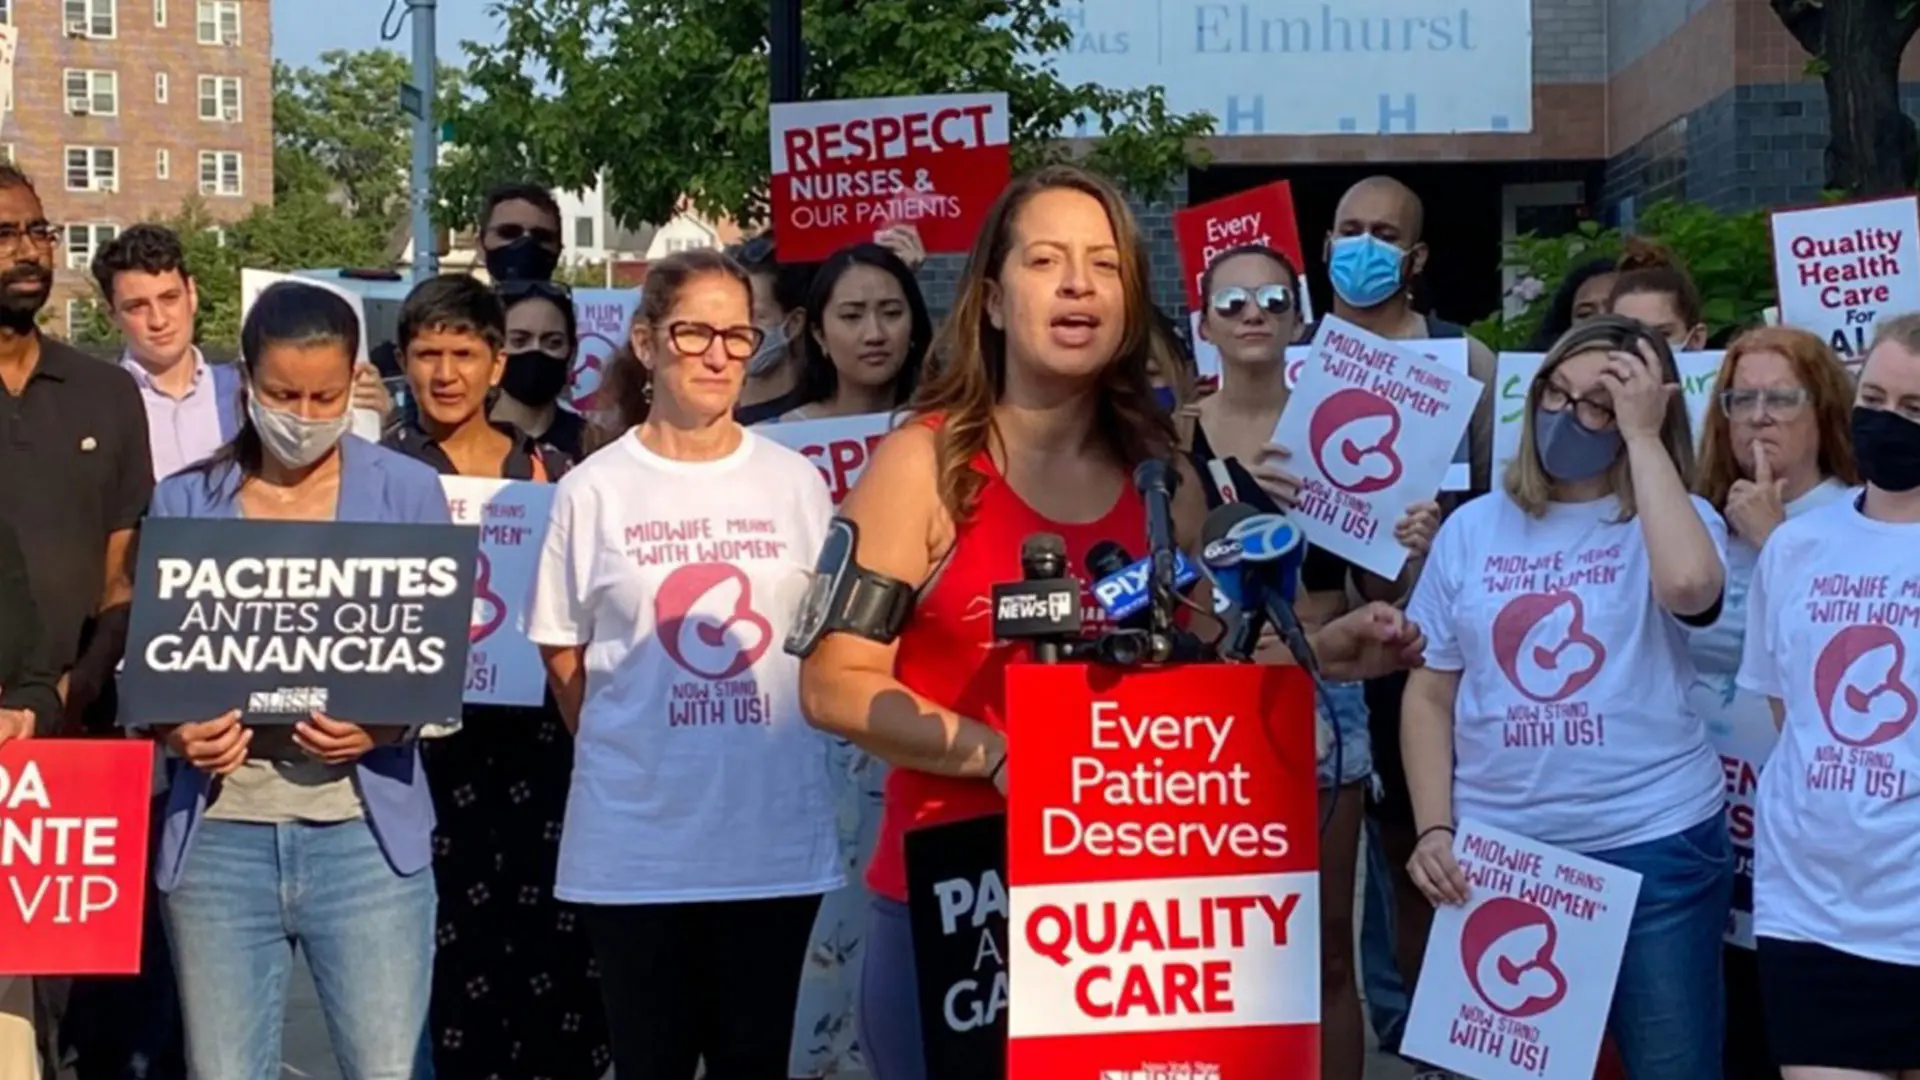 Department of Medicine faculty and students, including Duncan Maru,  MD, PhD, left rear next to lamppost, participated in a demonstration on behalf of pay parity for midwives, a key racial, immigrant, and gender justice issue. Speaking was New York State Assemblywoman Catalina Cruz.